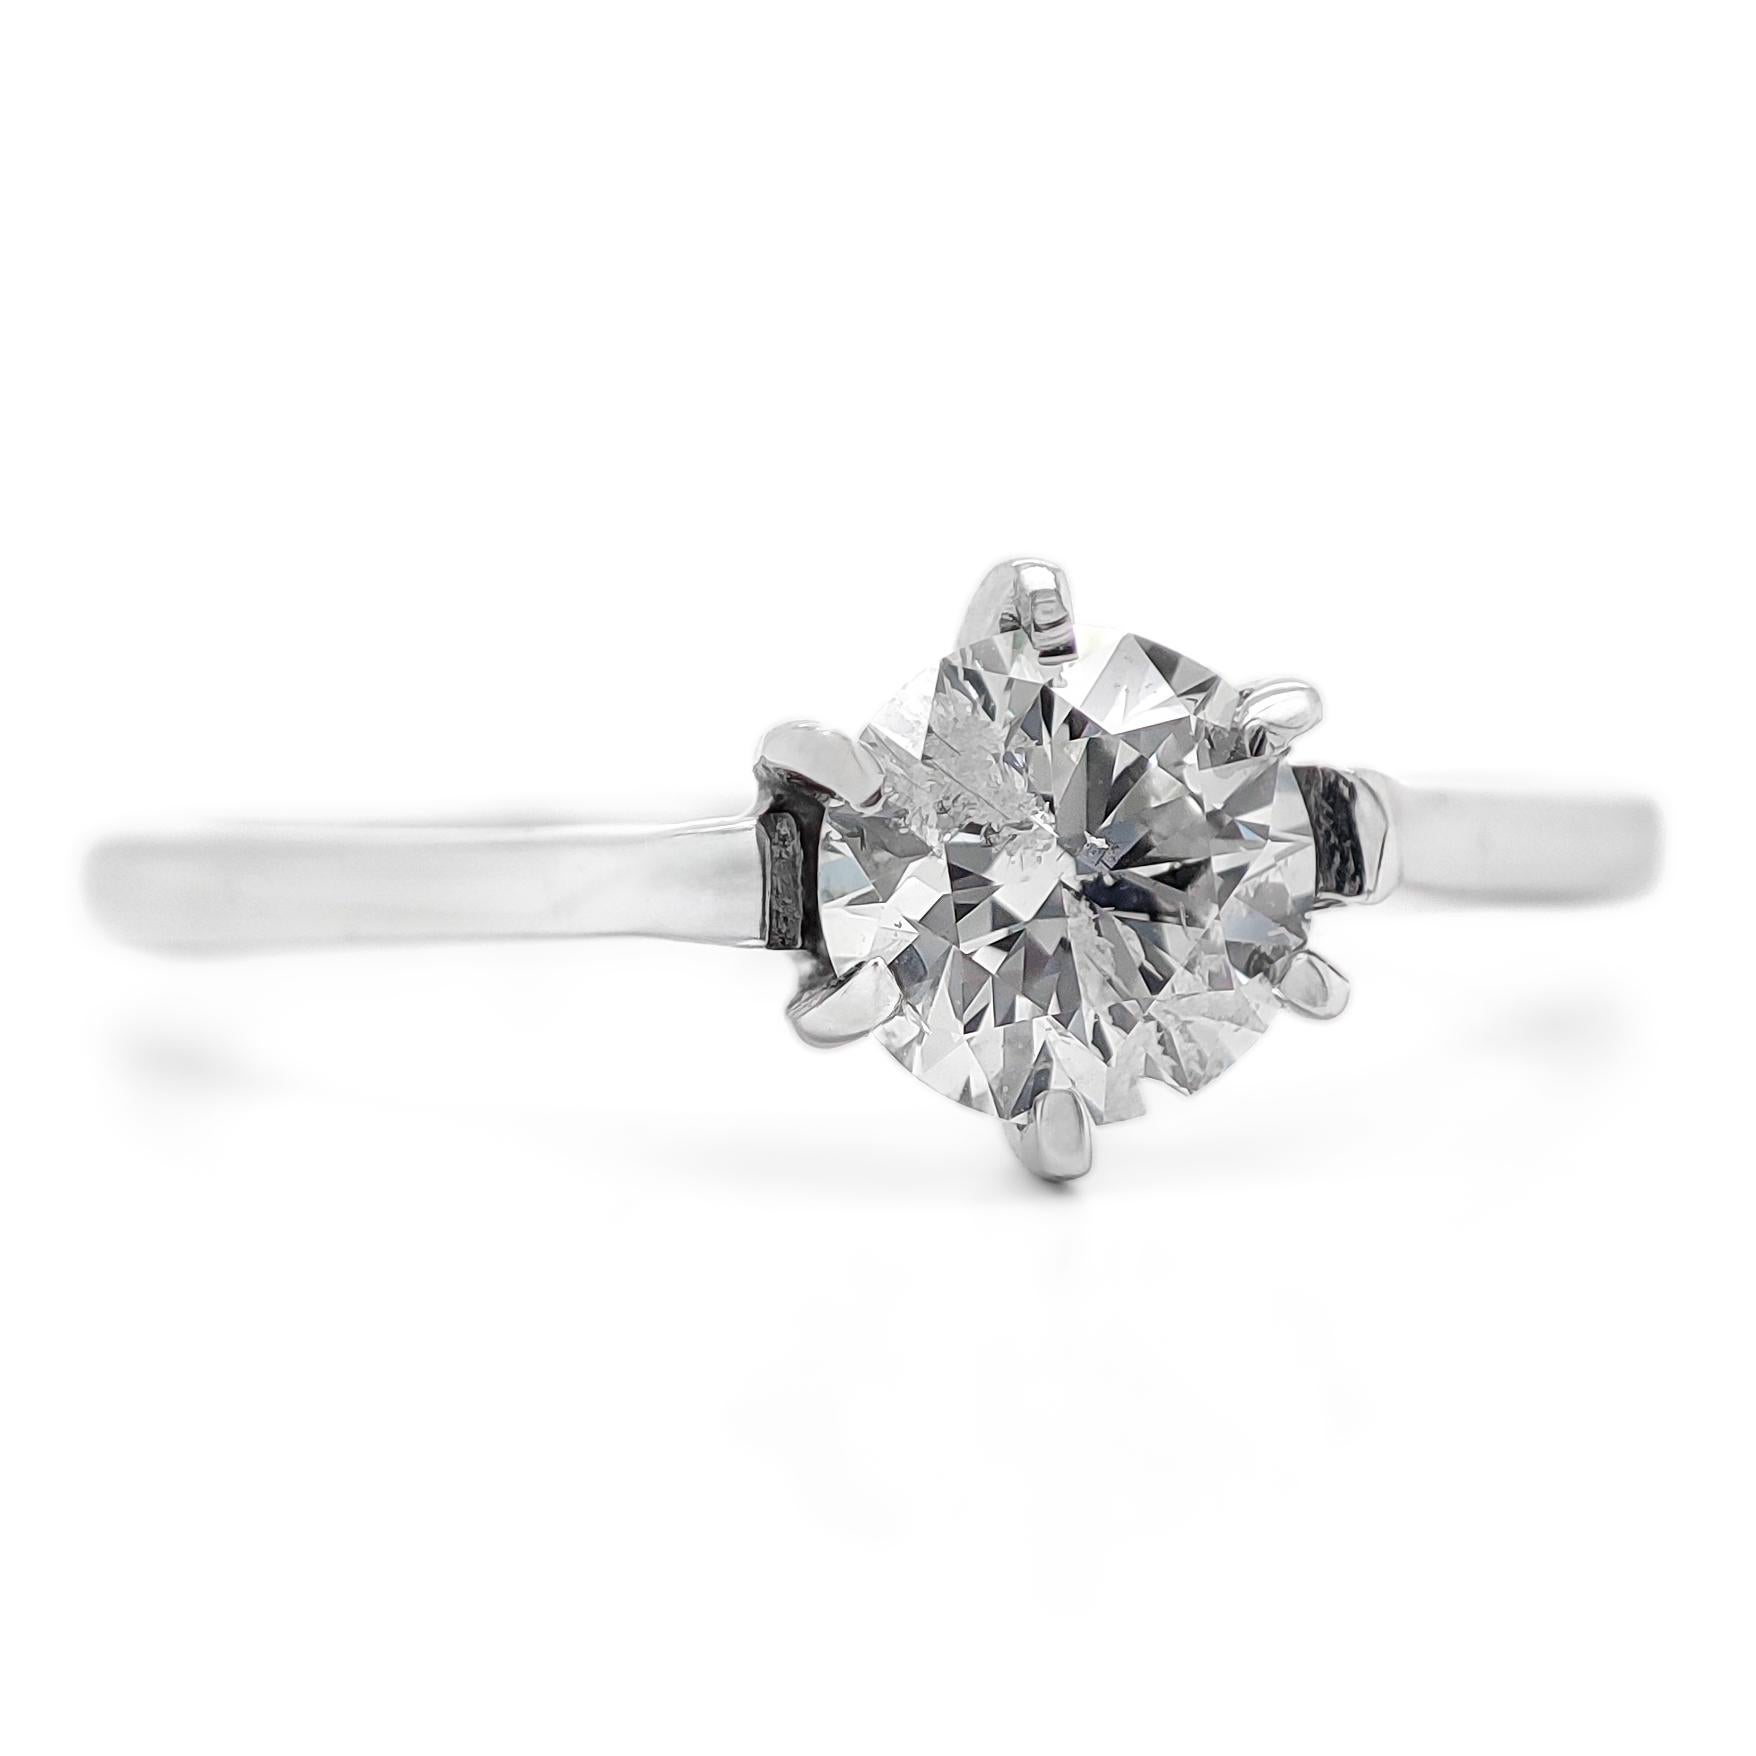 FOR US BUYER NO VAT

This solitaire engagement ring is a timeless symbol of your love and commitment. It features a brilliant 0.55 carat round diamond as its centerpiece, radiating its captivating and enduring sparkle.

The ring is crafted in 14K